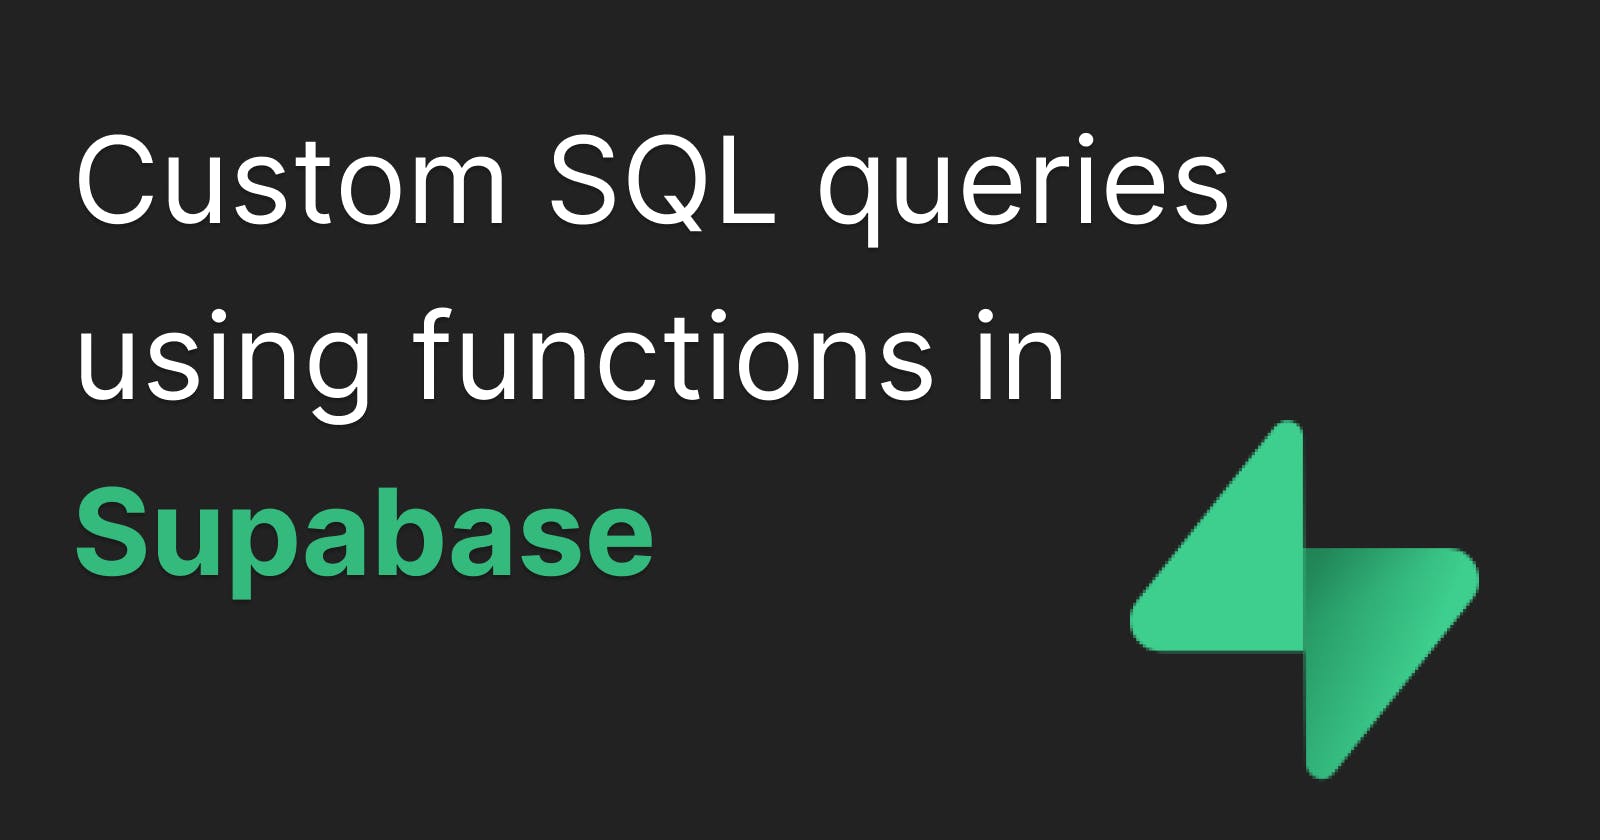 How to run custom SQL queries using functions in Supabase